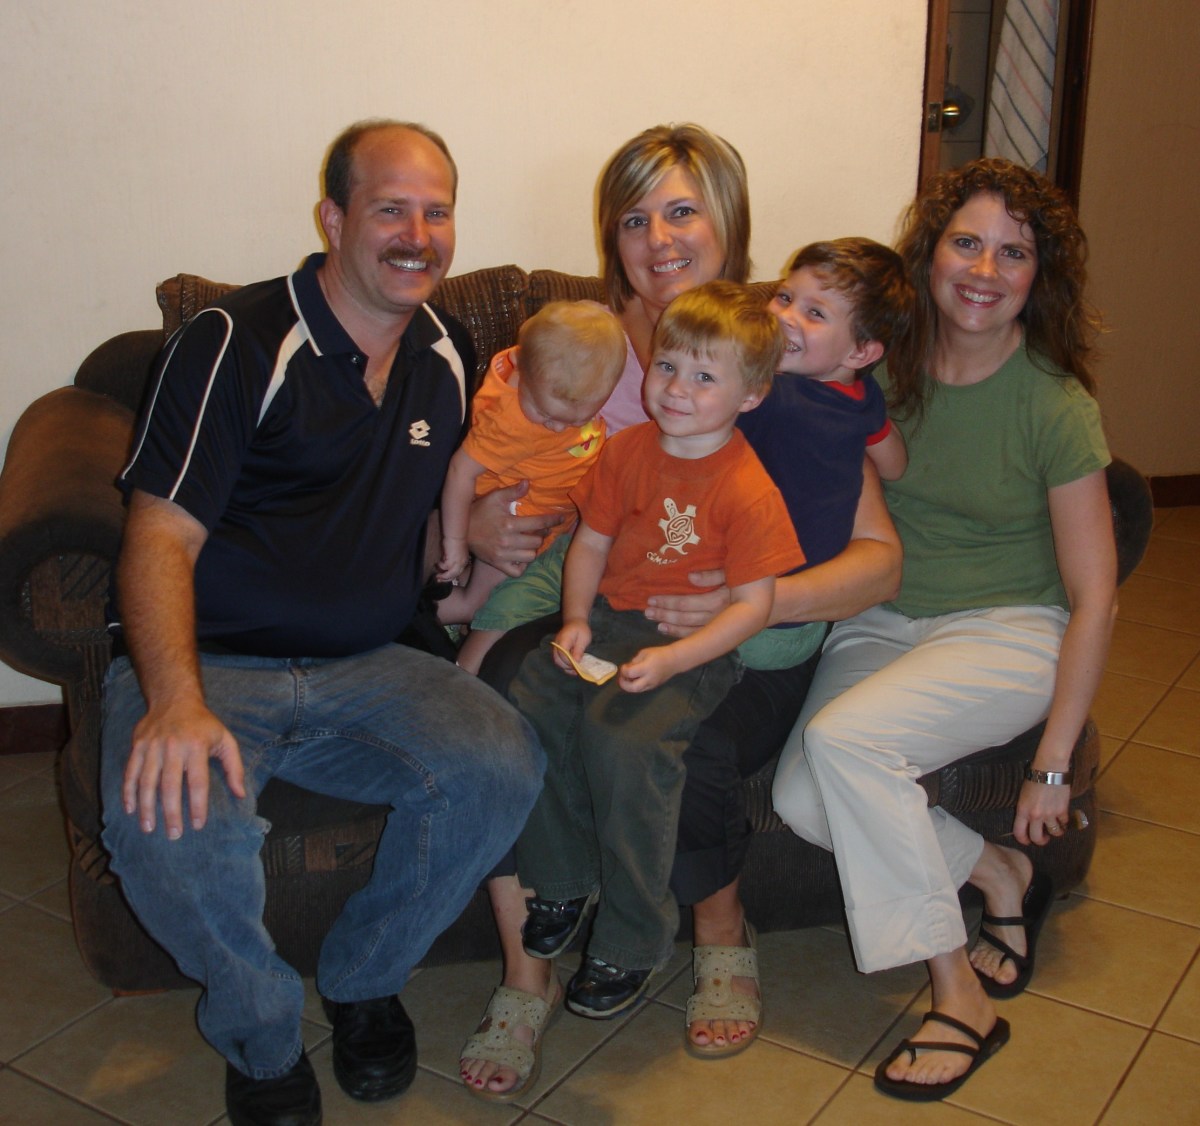 Jason Tressa and their three young children.  Michelle from our team is in the middle.